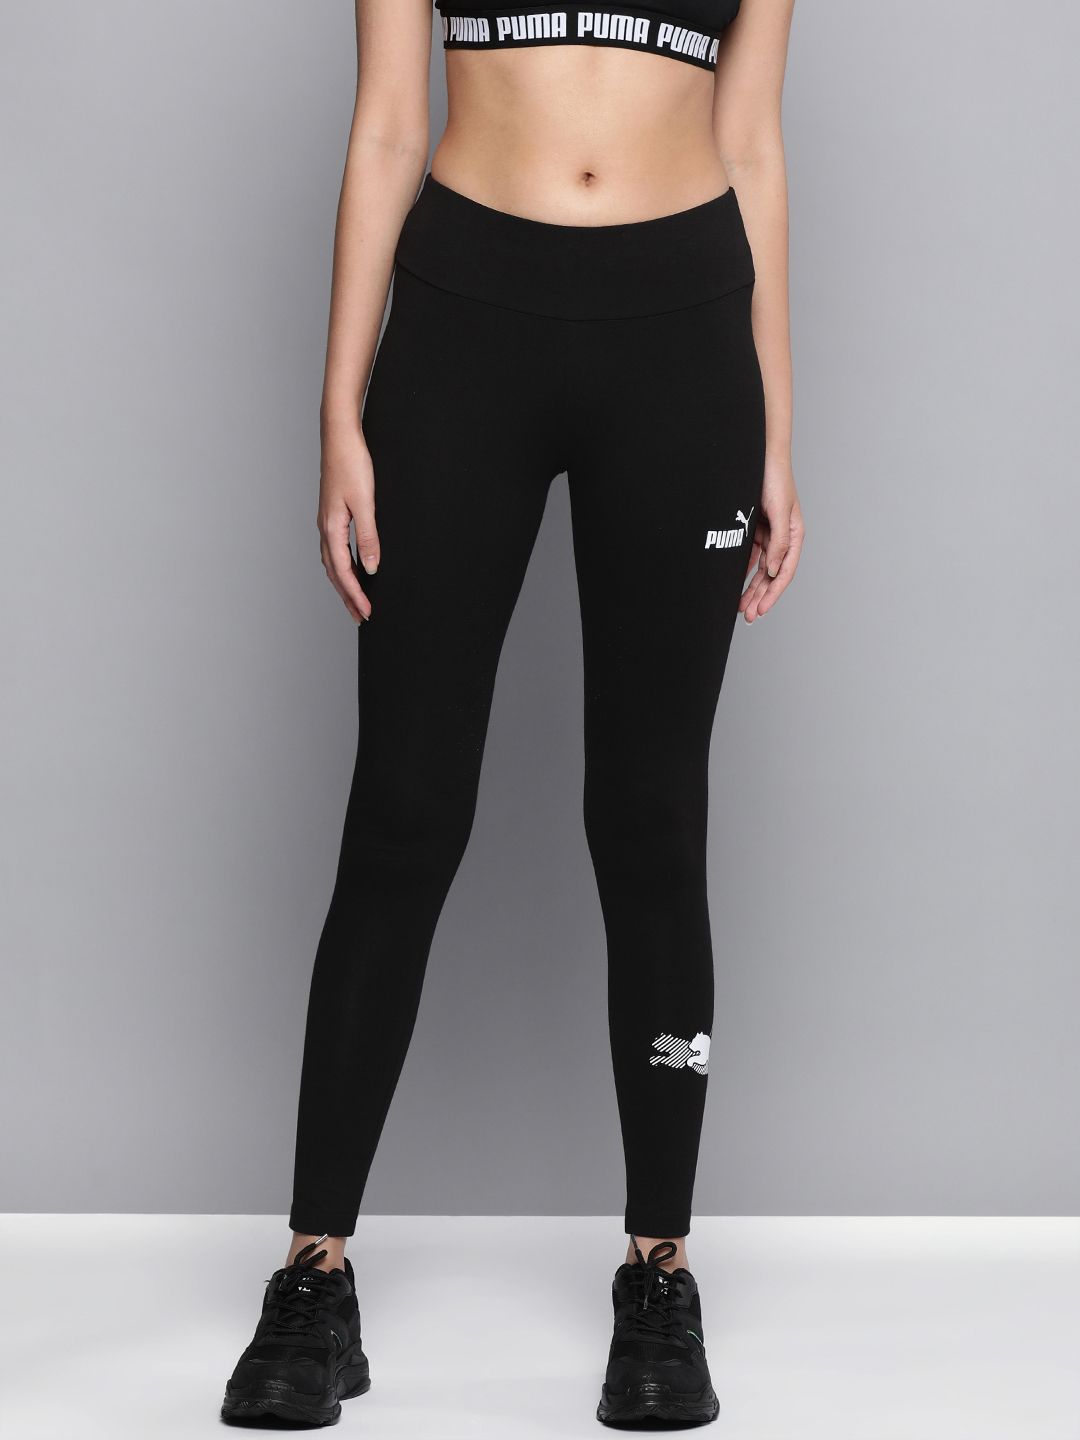 Puma Women Black Power Tights with Printed Detail Price in India